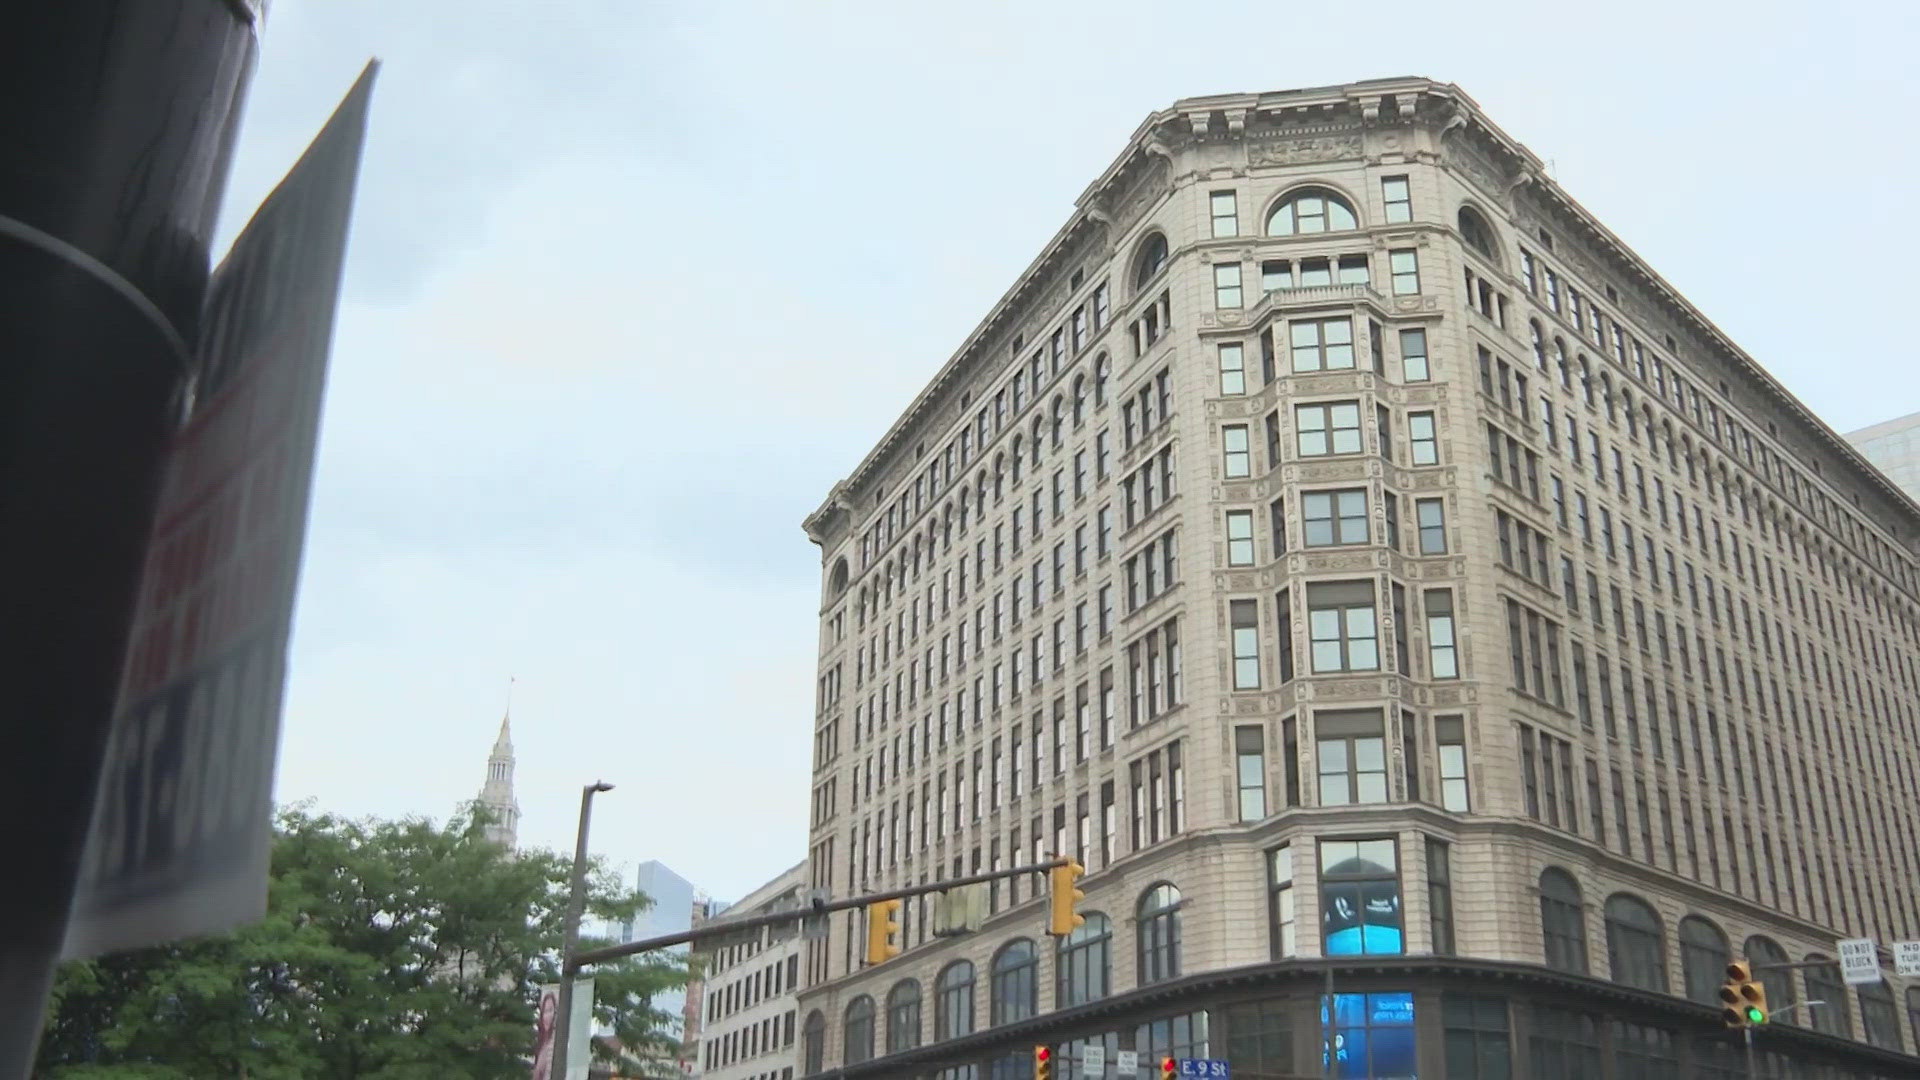 'Project Scarlet' from Spark GHC and Cleveland Construction plans to turn the Rose Building into a boutique hotel, apartments and retail.